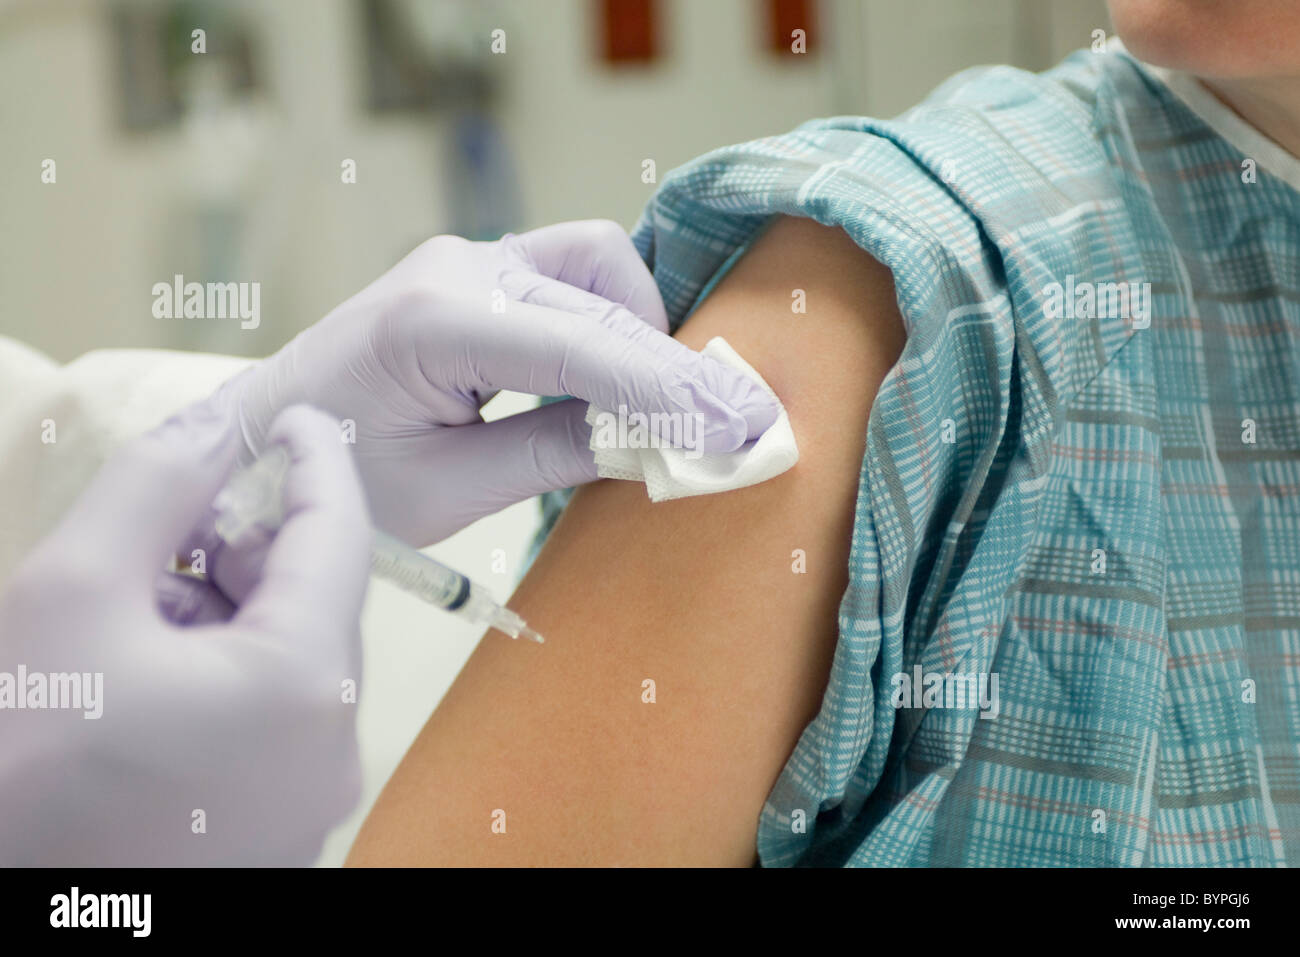 Doctor placing gauze on patient's arm after administering a shot Stock Photo